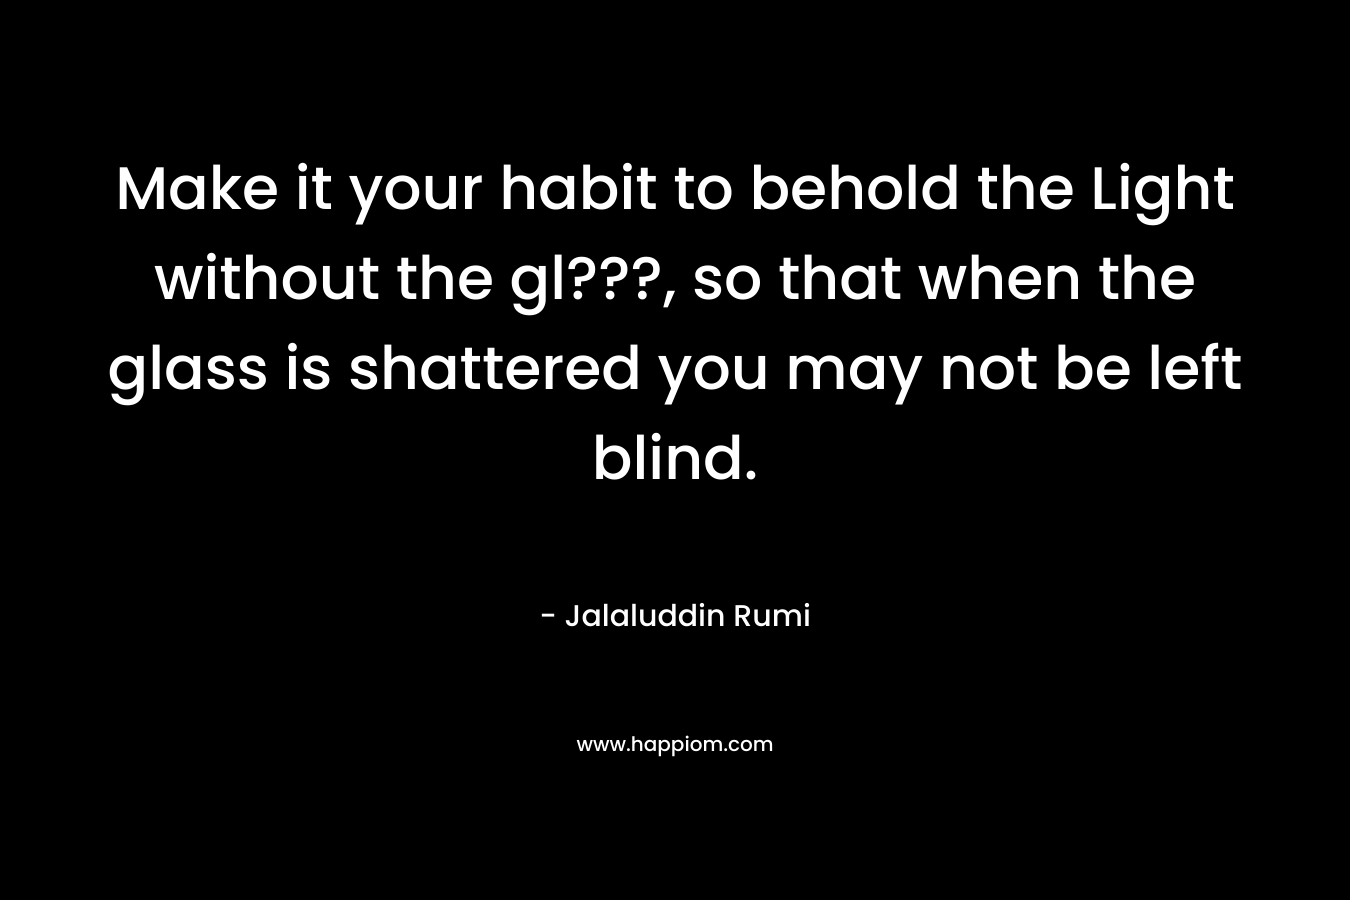 Make it your habit to behold the Light without the gl???, so that when the glass is shattered you may not be left blind. – Jalaluddin Rumi